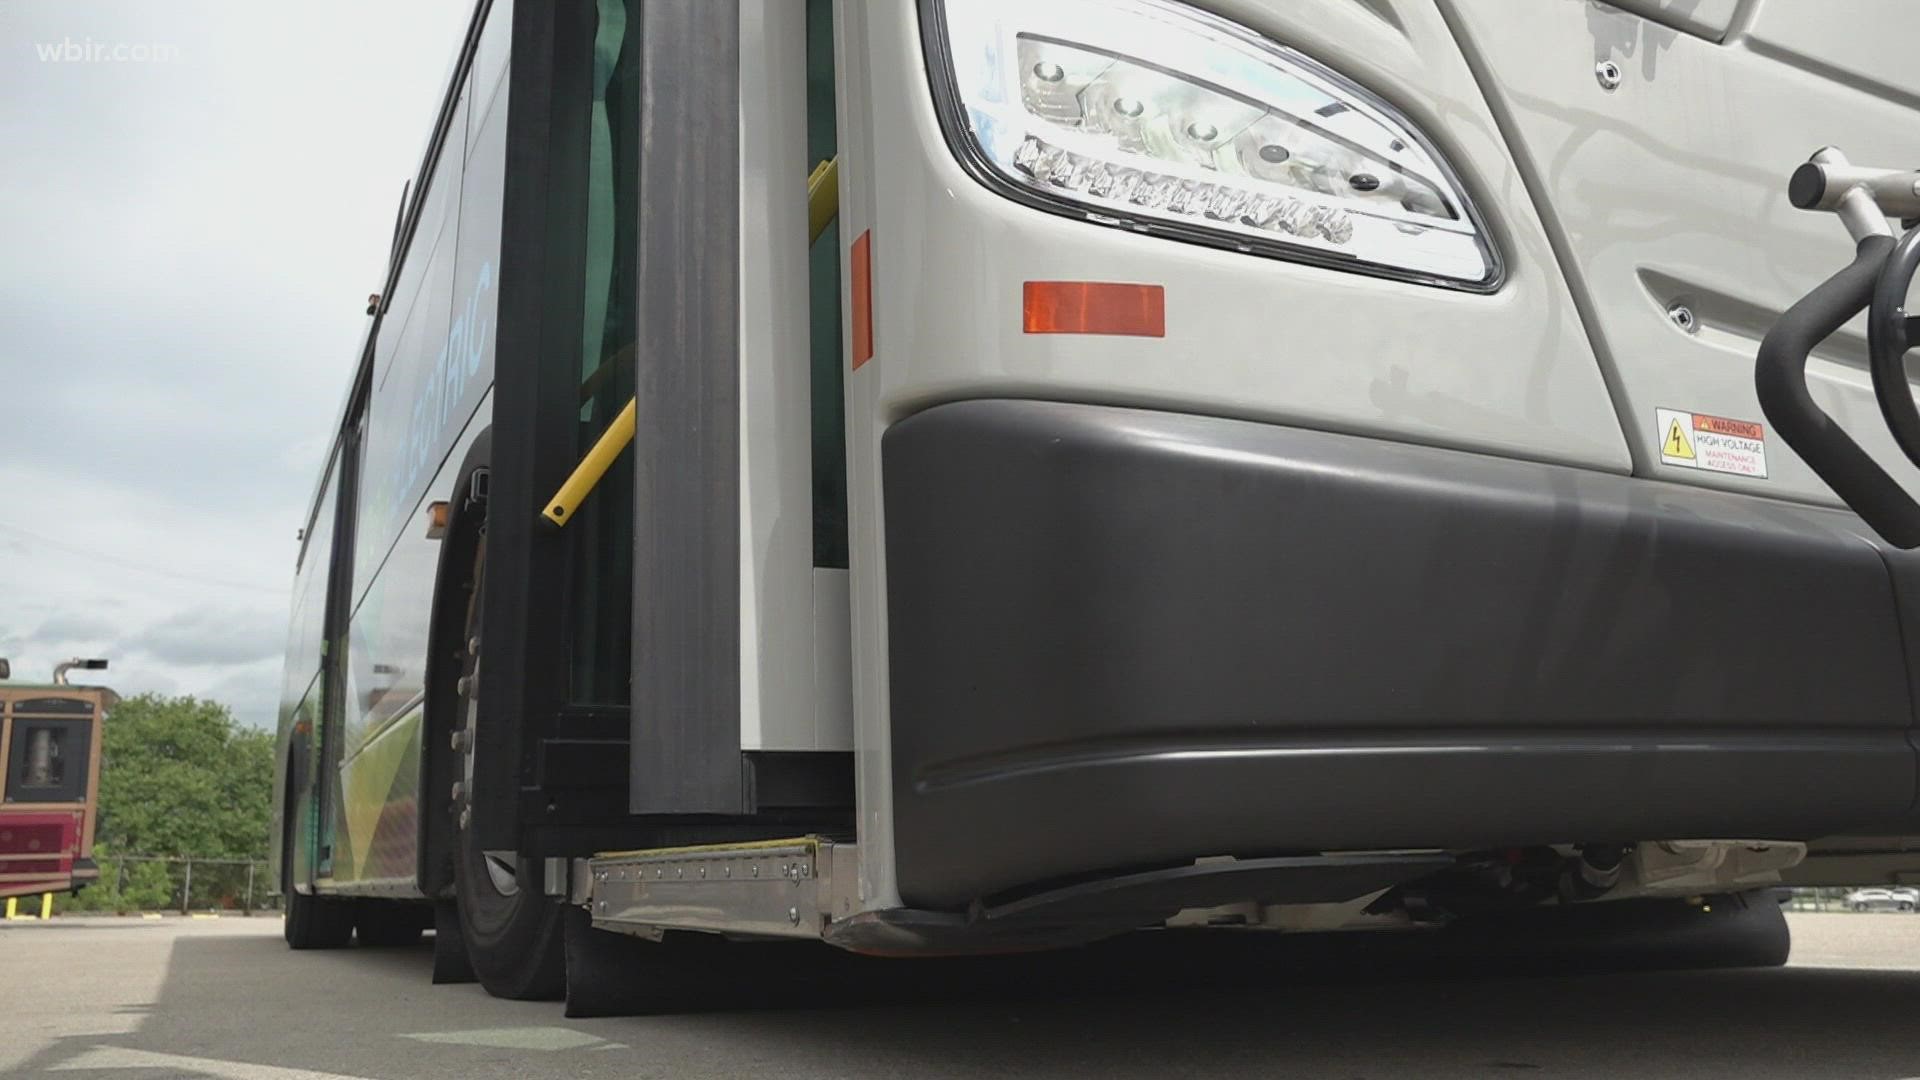 One of the largest contributors to greenhouse gases is emissions from vehicles. Electric public transportation like KAT buses help reduce those emissions.